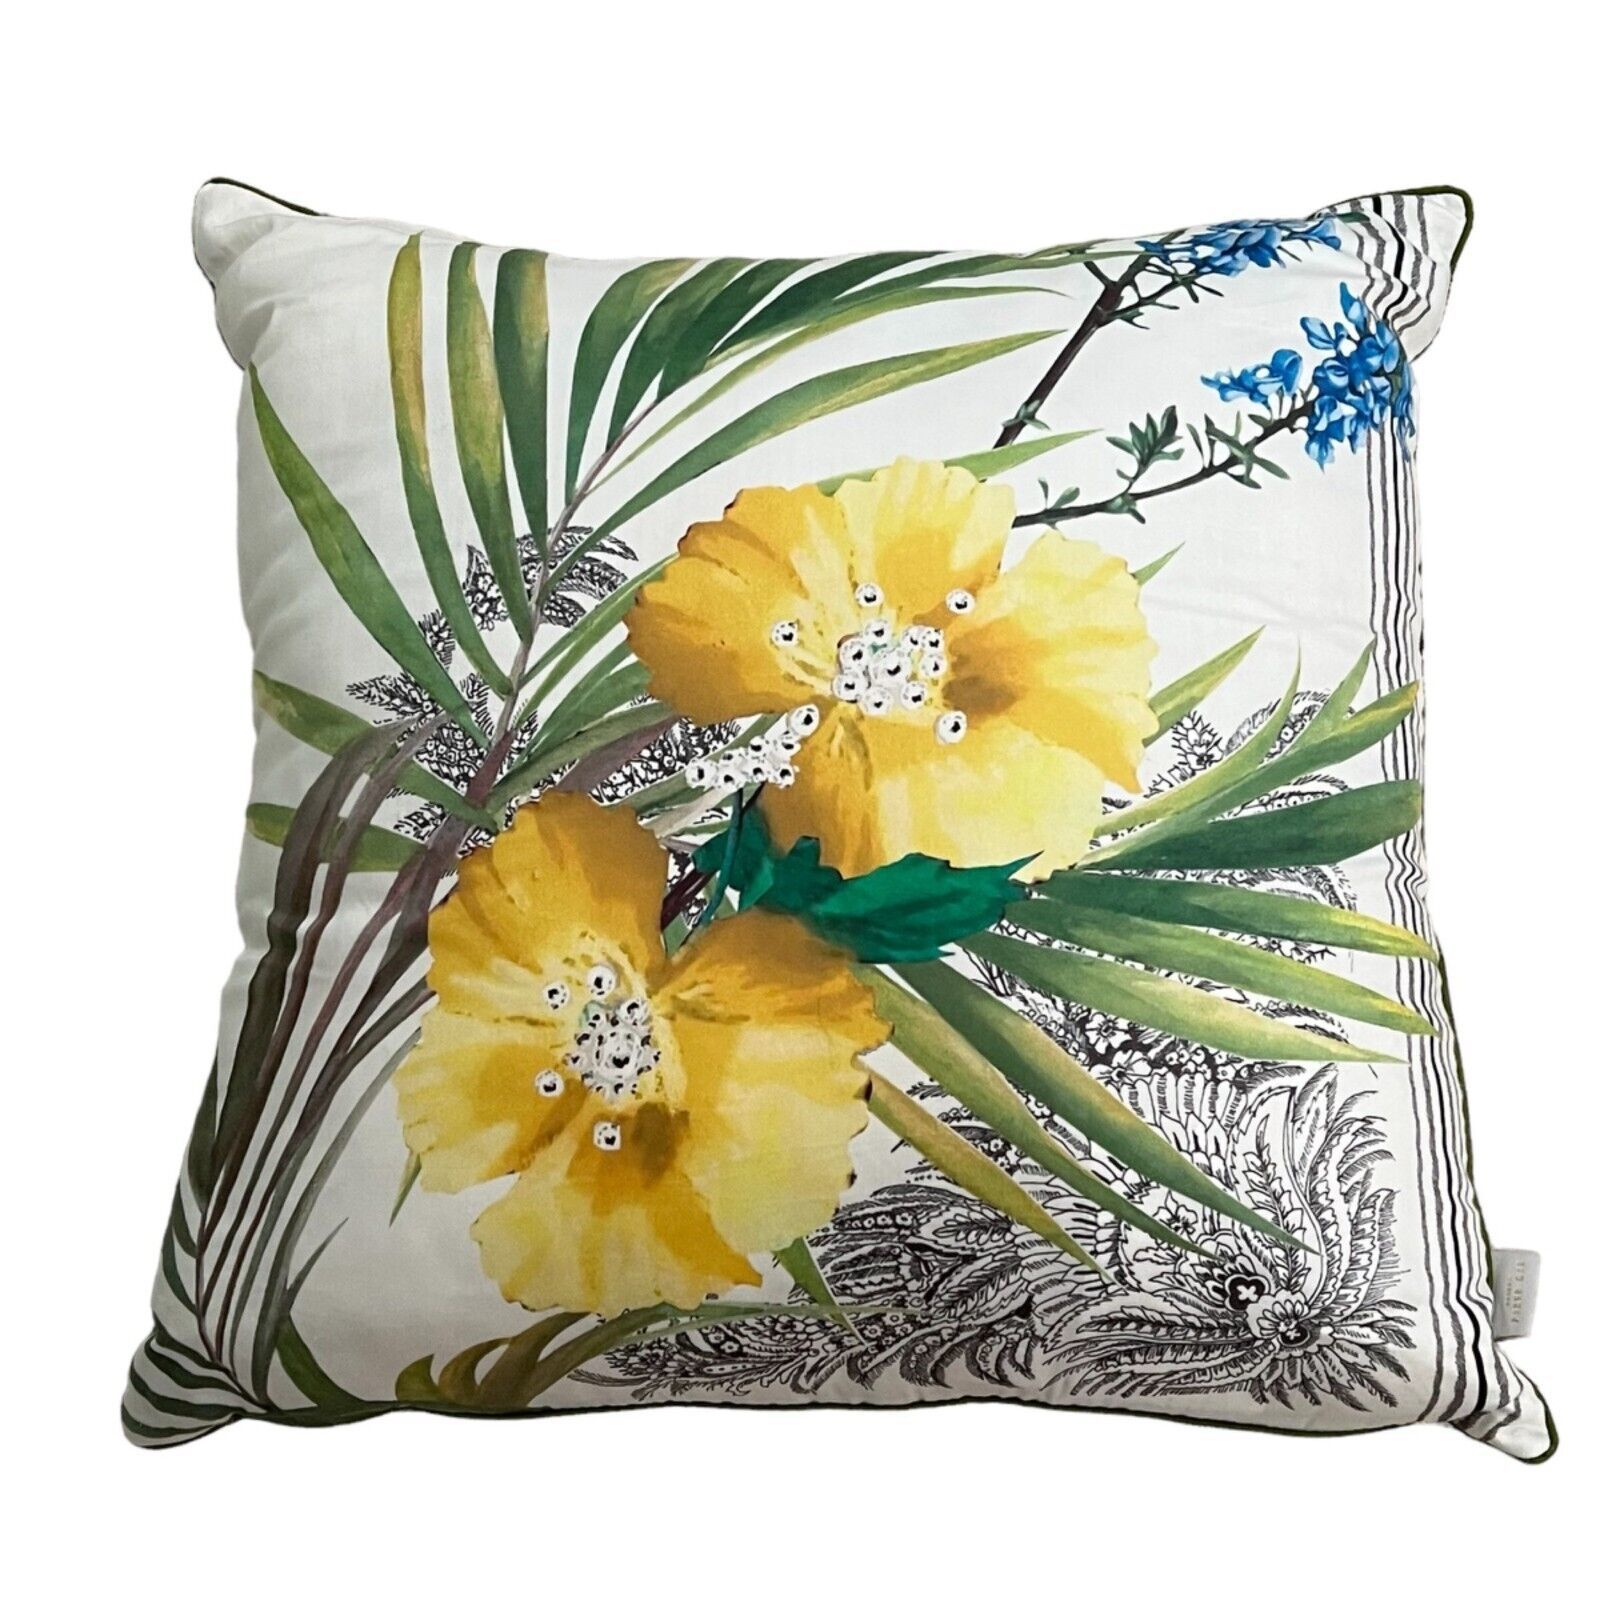 Ted Baker Royal Palm Square Throw Pillow - $38.40